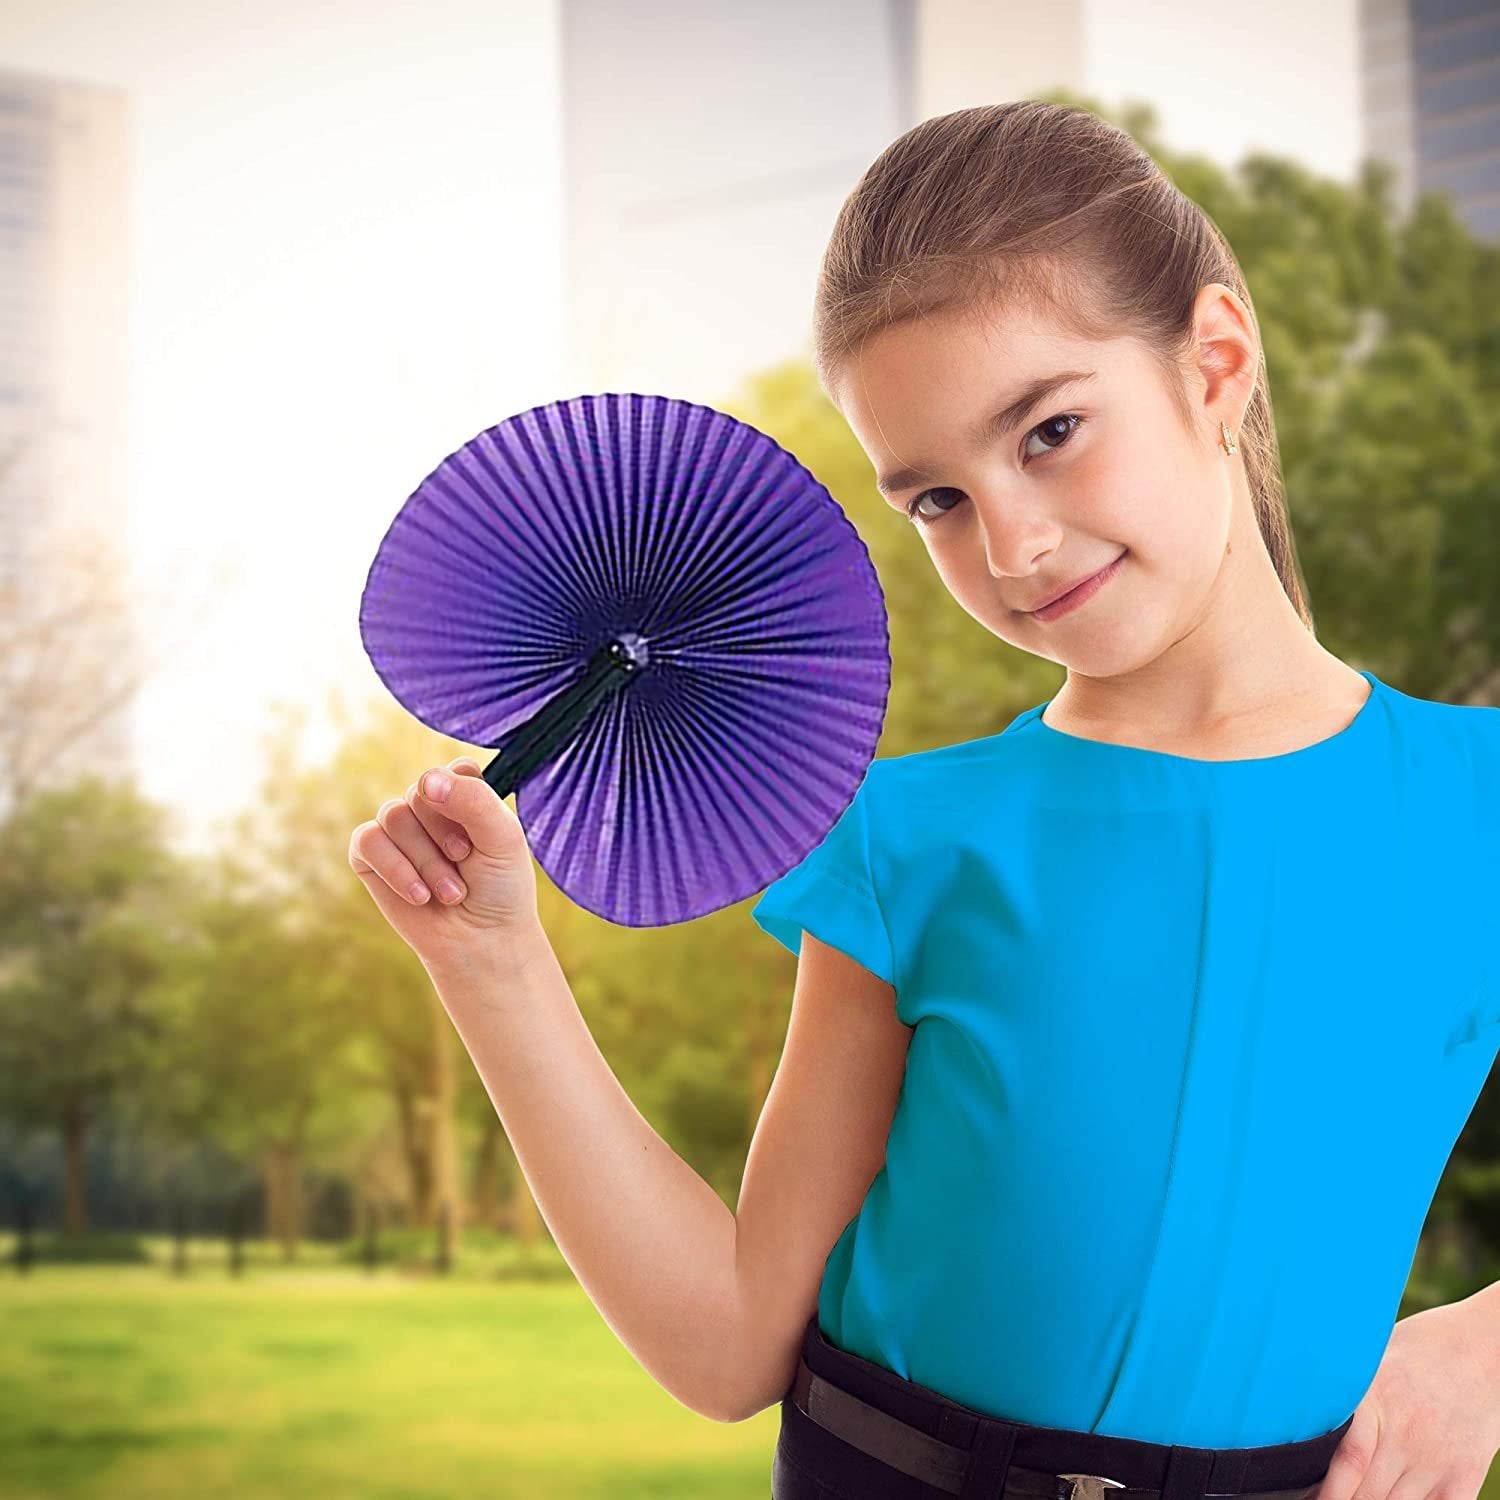 10" Colorful Folding Fans - Pack of 12 - Cool Summer Contraption - Handheld Paper Fan with Plastic Shafts - Hot New Party Favor and Prize - Fun Novelties, Gifts for Kids Ages 3+